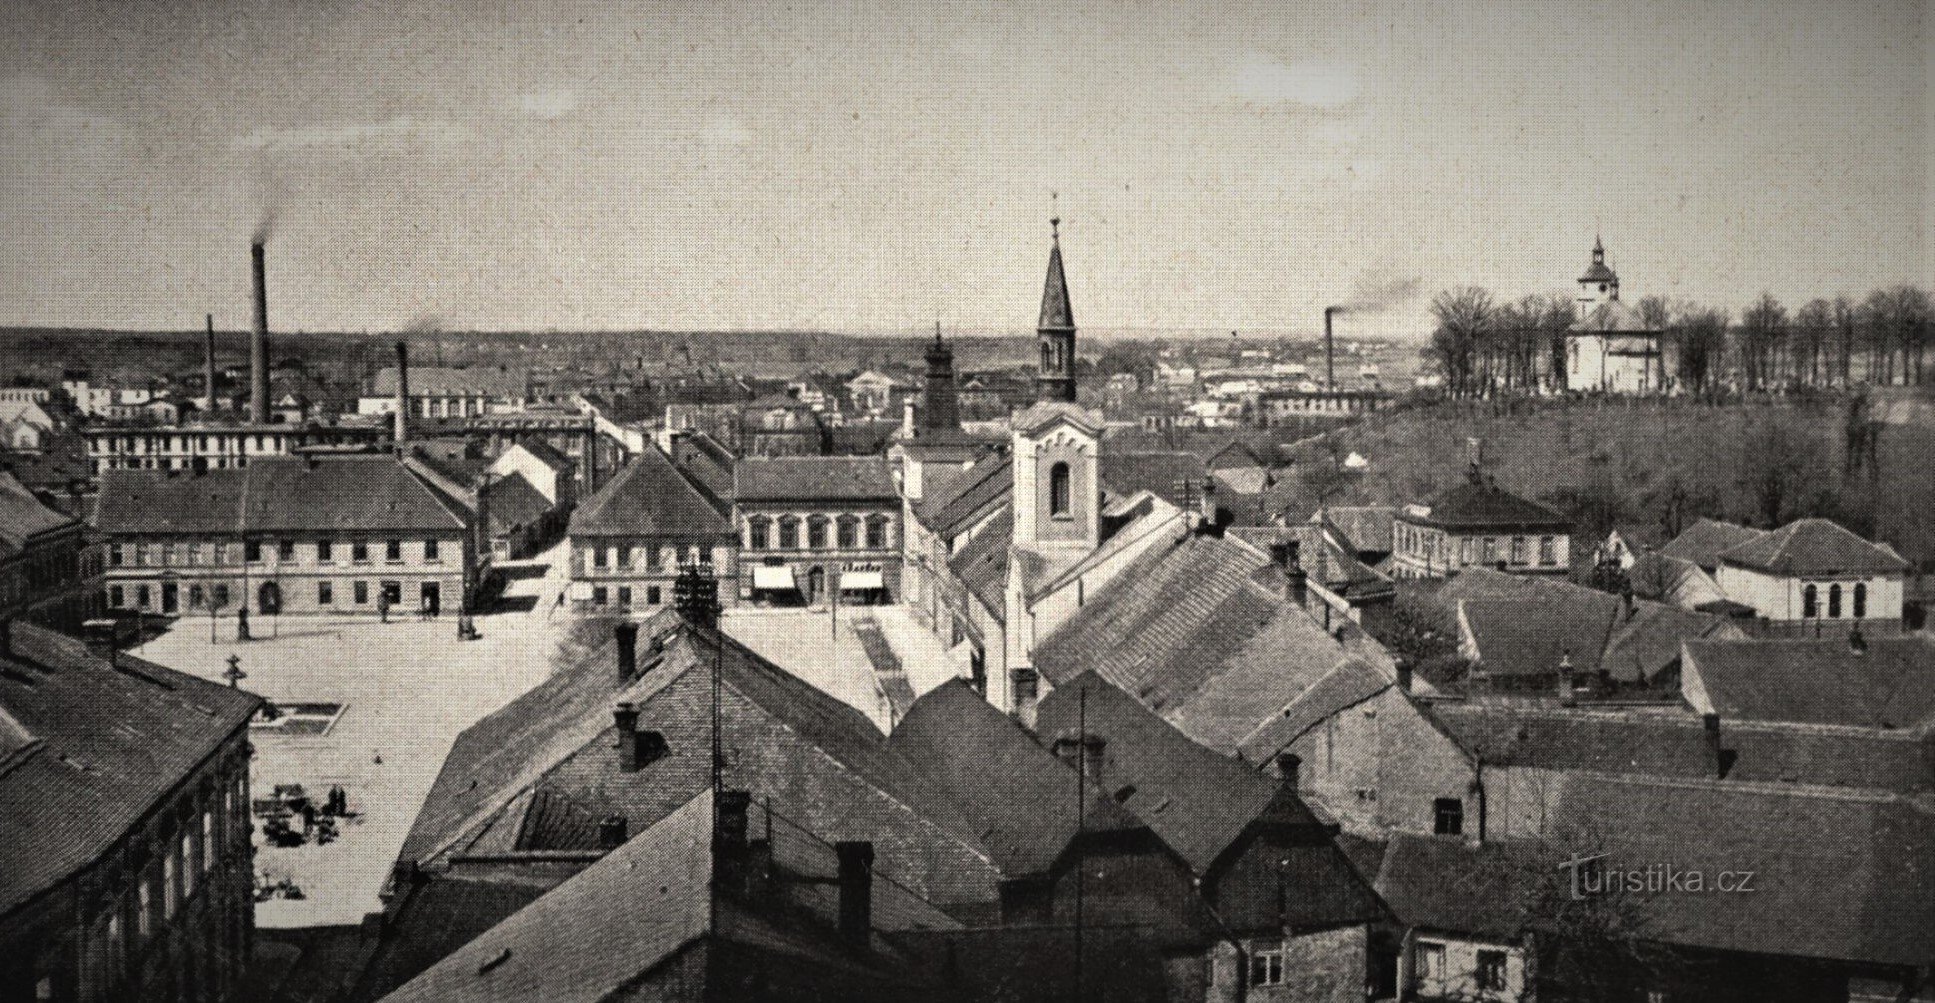 View of the square at the beginning of the 30s (Třebechovice pod Orebem)